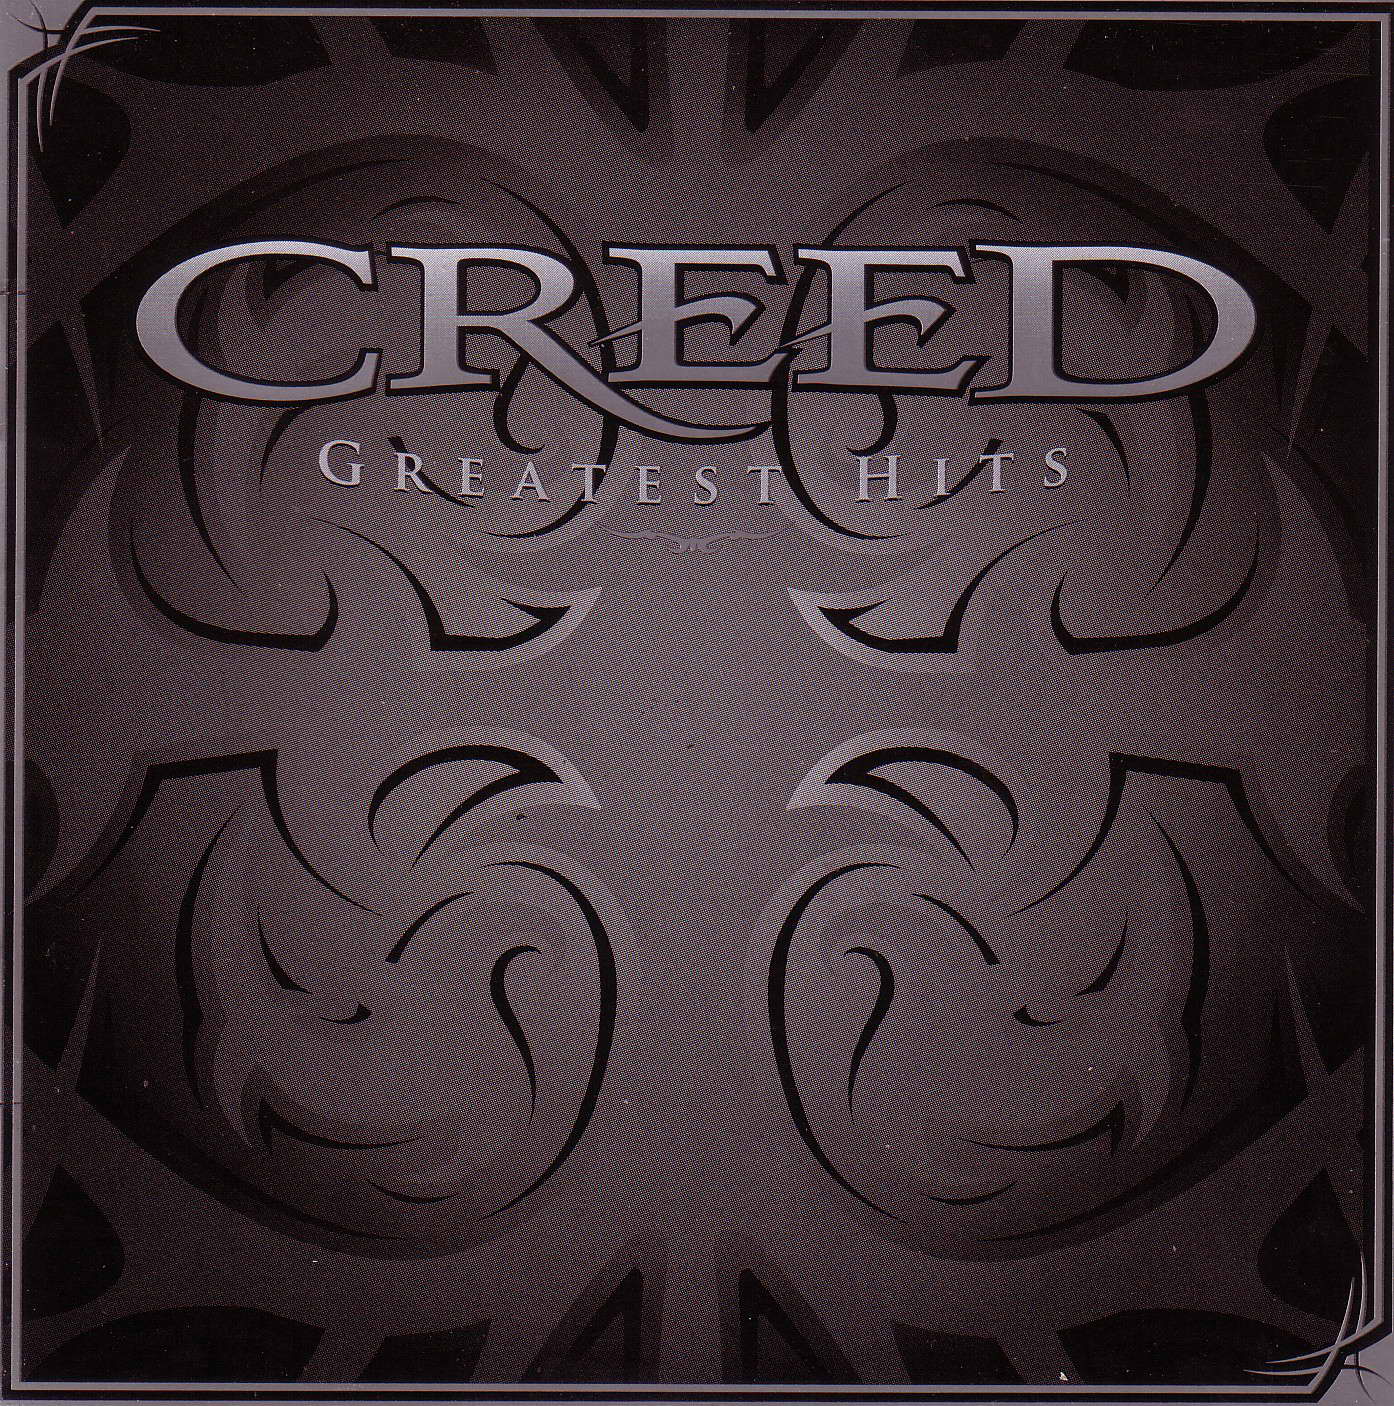 [[AllCDCovers]_creed_greatest_hits_retail_cd-front.jpg]